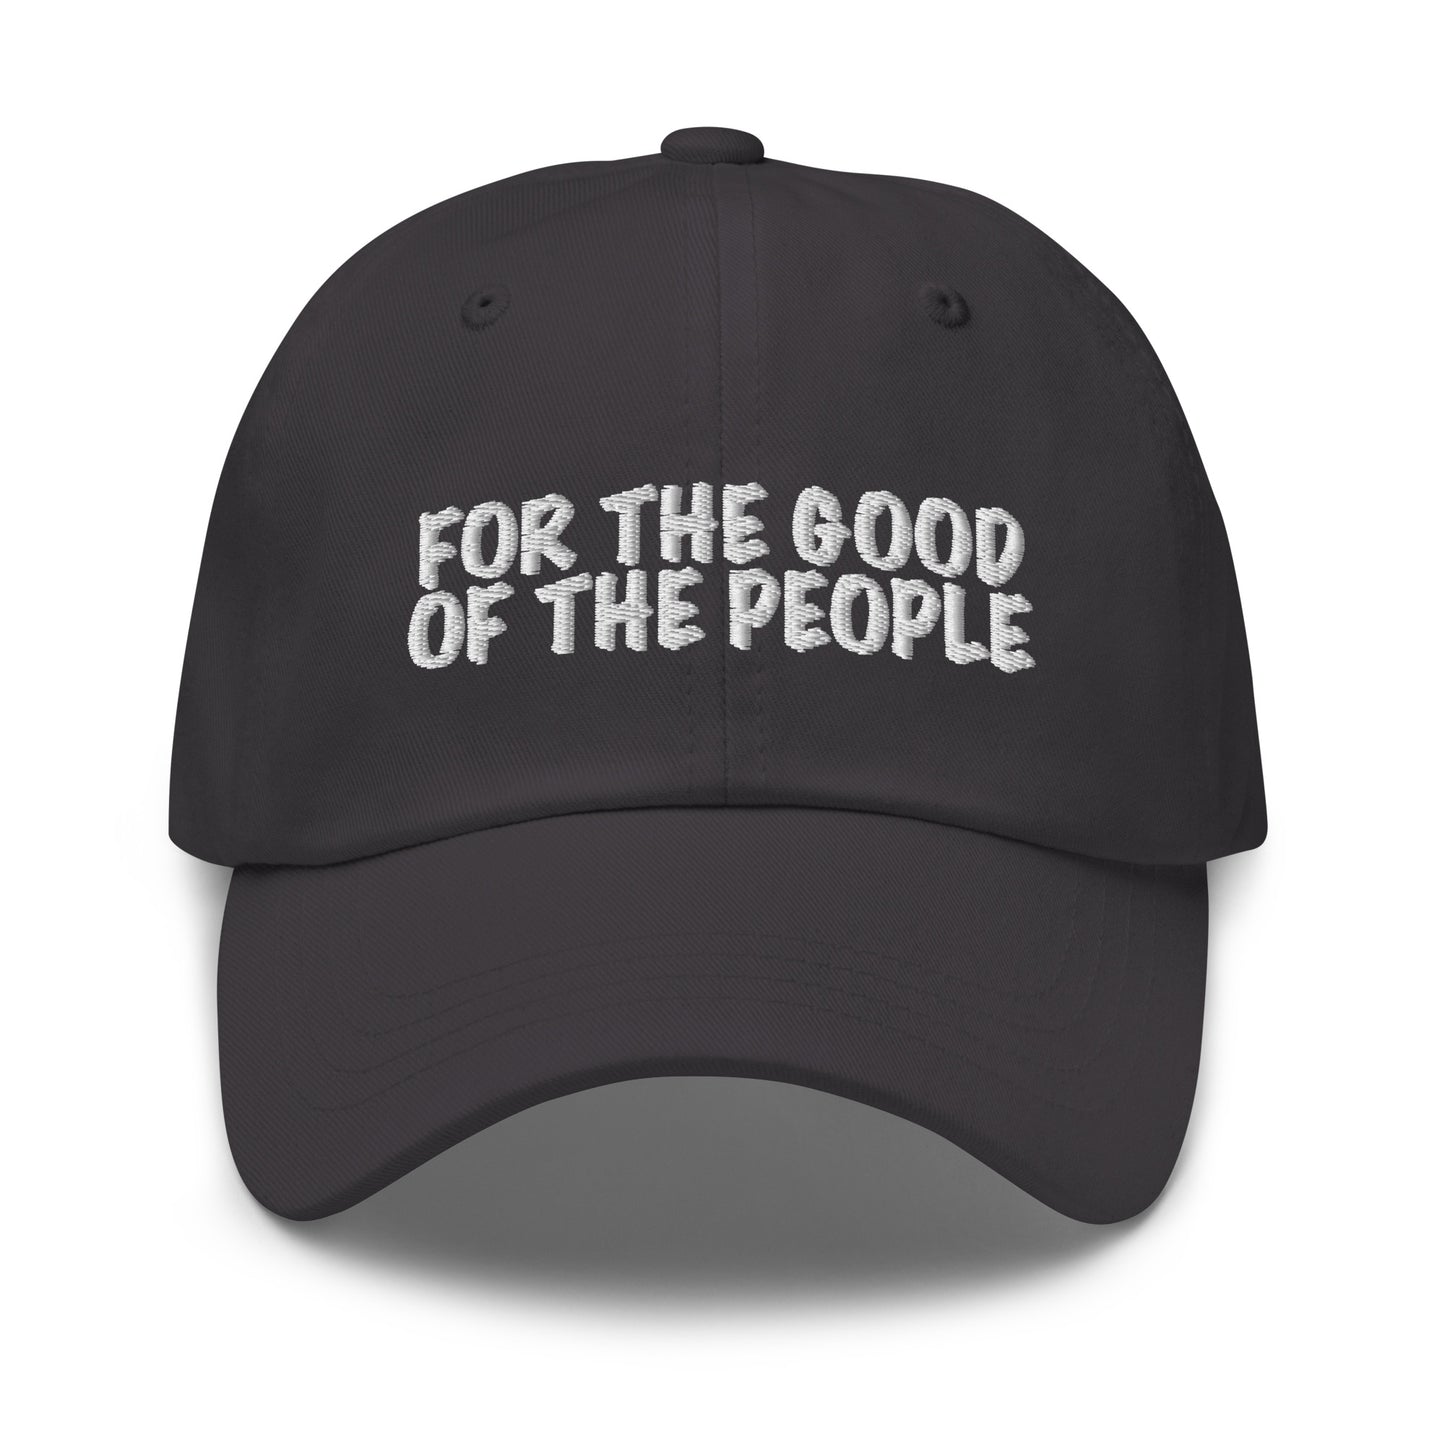 For the good of the people embroidered in white on front of gray dad hat.